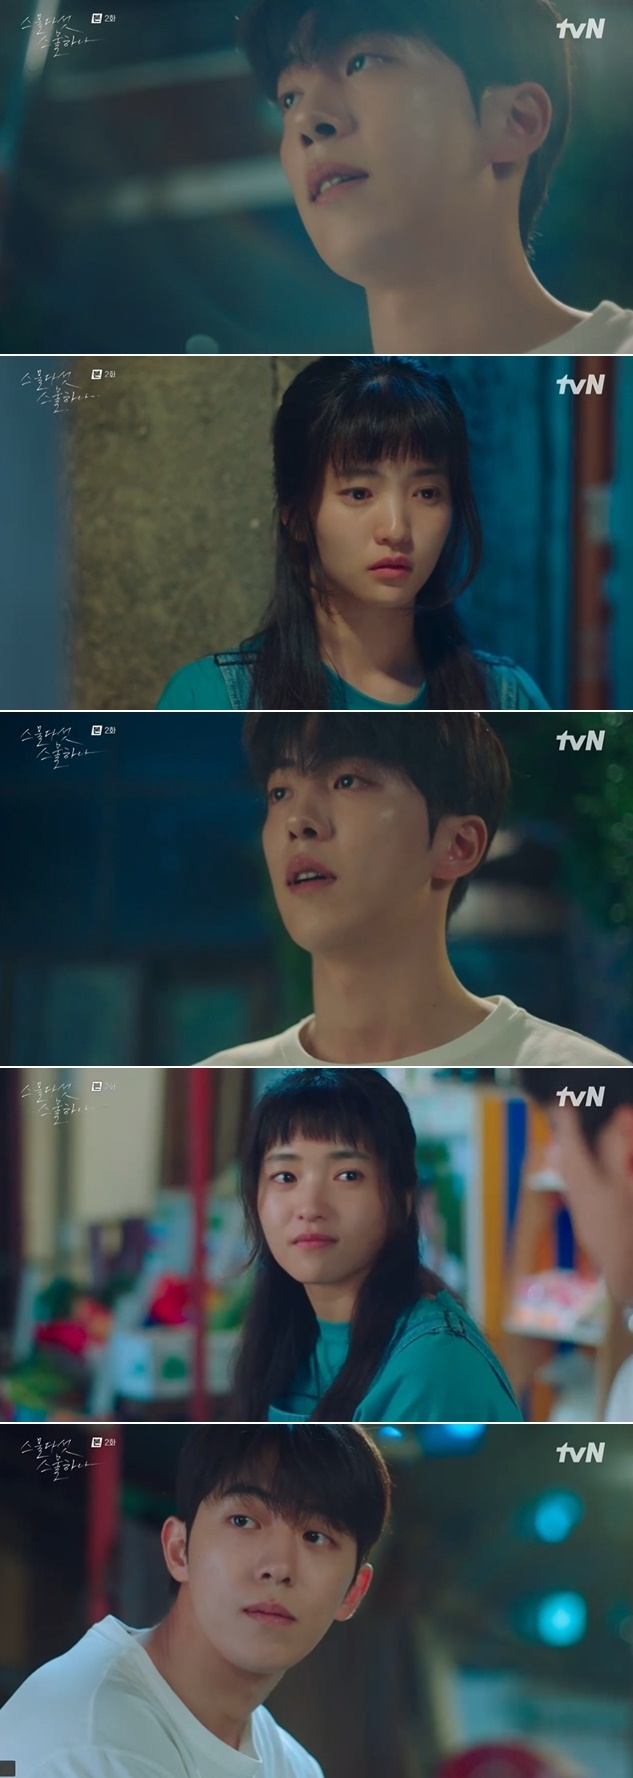 Kim Tae-ri and Bona finally came face-to-face with fencing. Nam Ju-hyeok was struggling with the misfortune of coming to the IMF.In the second episode of tvNs new Saturday drama Twenty Five Twenty One (playplayplay by Kwon Do-eun/directed by Jung Ji-hyun/produced by Hwa-An-dam Pictures), which aired on February 13, Na Hee-do (Kim Tae-ri), whose fencing department was missing due to the IMF, was shown transferring to a solar high school with a dream and longing fencing national representative, Yu Rim (Bona).Twenty Five Twinty One is a drama depicting the wandering and growth of youths who were deprived of their dreams in the 1998 era.Nahee, who has always admired Yu Rim, felt a dream time saying, I am practicing with Yu Rim, I am really in your world.But for a moment, he said, Are you okay with the injury? Im a fan. I saw everything except your Kyonggi.To Na Hee-do, who says, I want to be like you, Yu Rim said, It sounds like a lamp. Do you think I saw one or two kids like you?I can not stand the difference in my skills, so I can not endure my class. Do not be confused, you are not more than a budget for one person, he said. If you do not know your name on this narrow floor, it is your report card.Na Hee-do and Yu Rim were then set to face each other in practice Kyonggi, and Na Hee-do, who had been criticized by the high-ranking Yu Rim, had a match before the game and burned the previous sentence.In the beginning of Kyonggi, the high Yu Rim overpowered the early steamer; however, Na Hee was never easy either.The two men had already faced each other five years ago.At that time, Na Hee-do won the high Yu Rim, and Yu Rim was forced to look at Na Hee-do, who was told that he was a fencing prodigy.Na Hee-do won against the high-Yu Rim on the same day, and the high-Yu Rim looked incredible, and he hit Na Hee-dos hand asking for a handshake and turned back calmly.Meanwhile, after the IMF broke his fathers company, his family was scattered and lived alone, and Lee Jin was plagued by debtors who chased him to the front of the house.I am sorry that I can not do anything, said Lee Jin, who is crying, I will never be happy instead. I will always think about my pain.Na Hee-do witnessed this, and Lee Jin also found Na Hee-do, who watched everything. Na Hee-do opened his mouth hard and said, I came to pay back the money.The comic book is worth 3,000 won, and Lee Jin said, Please do something different with money. You see, I do not like money now.